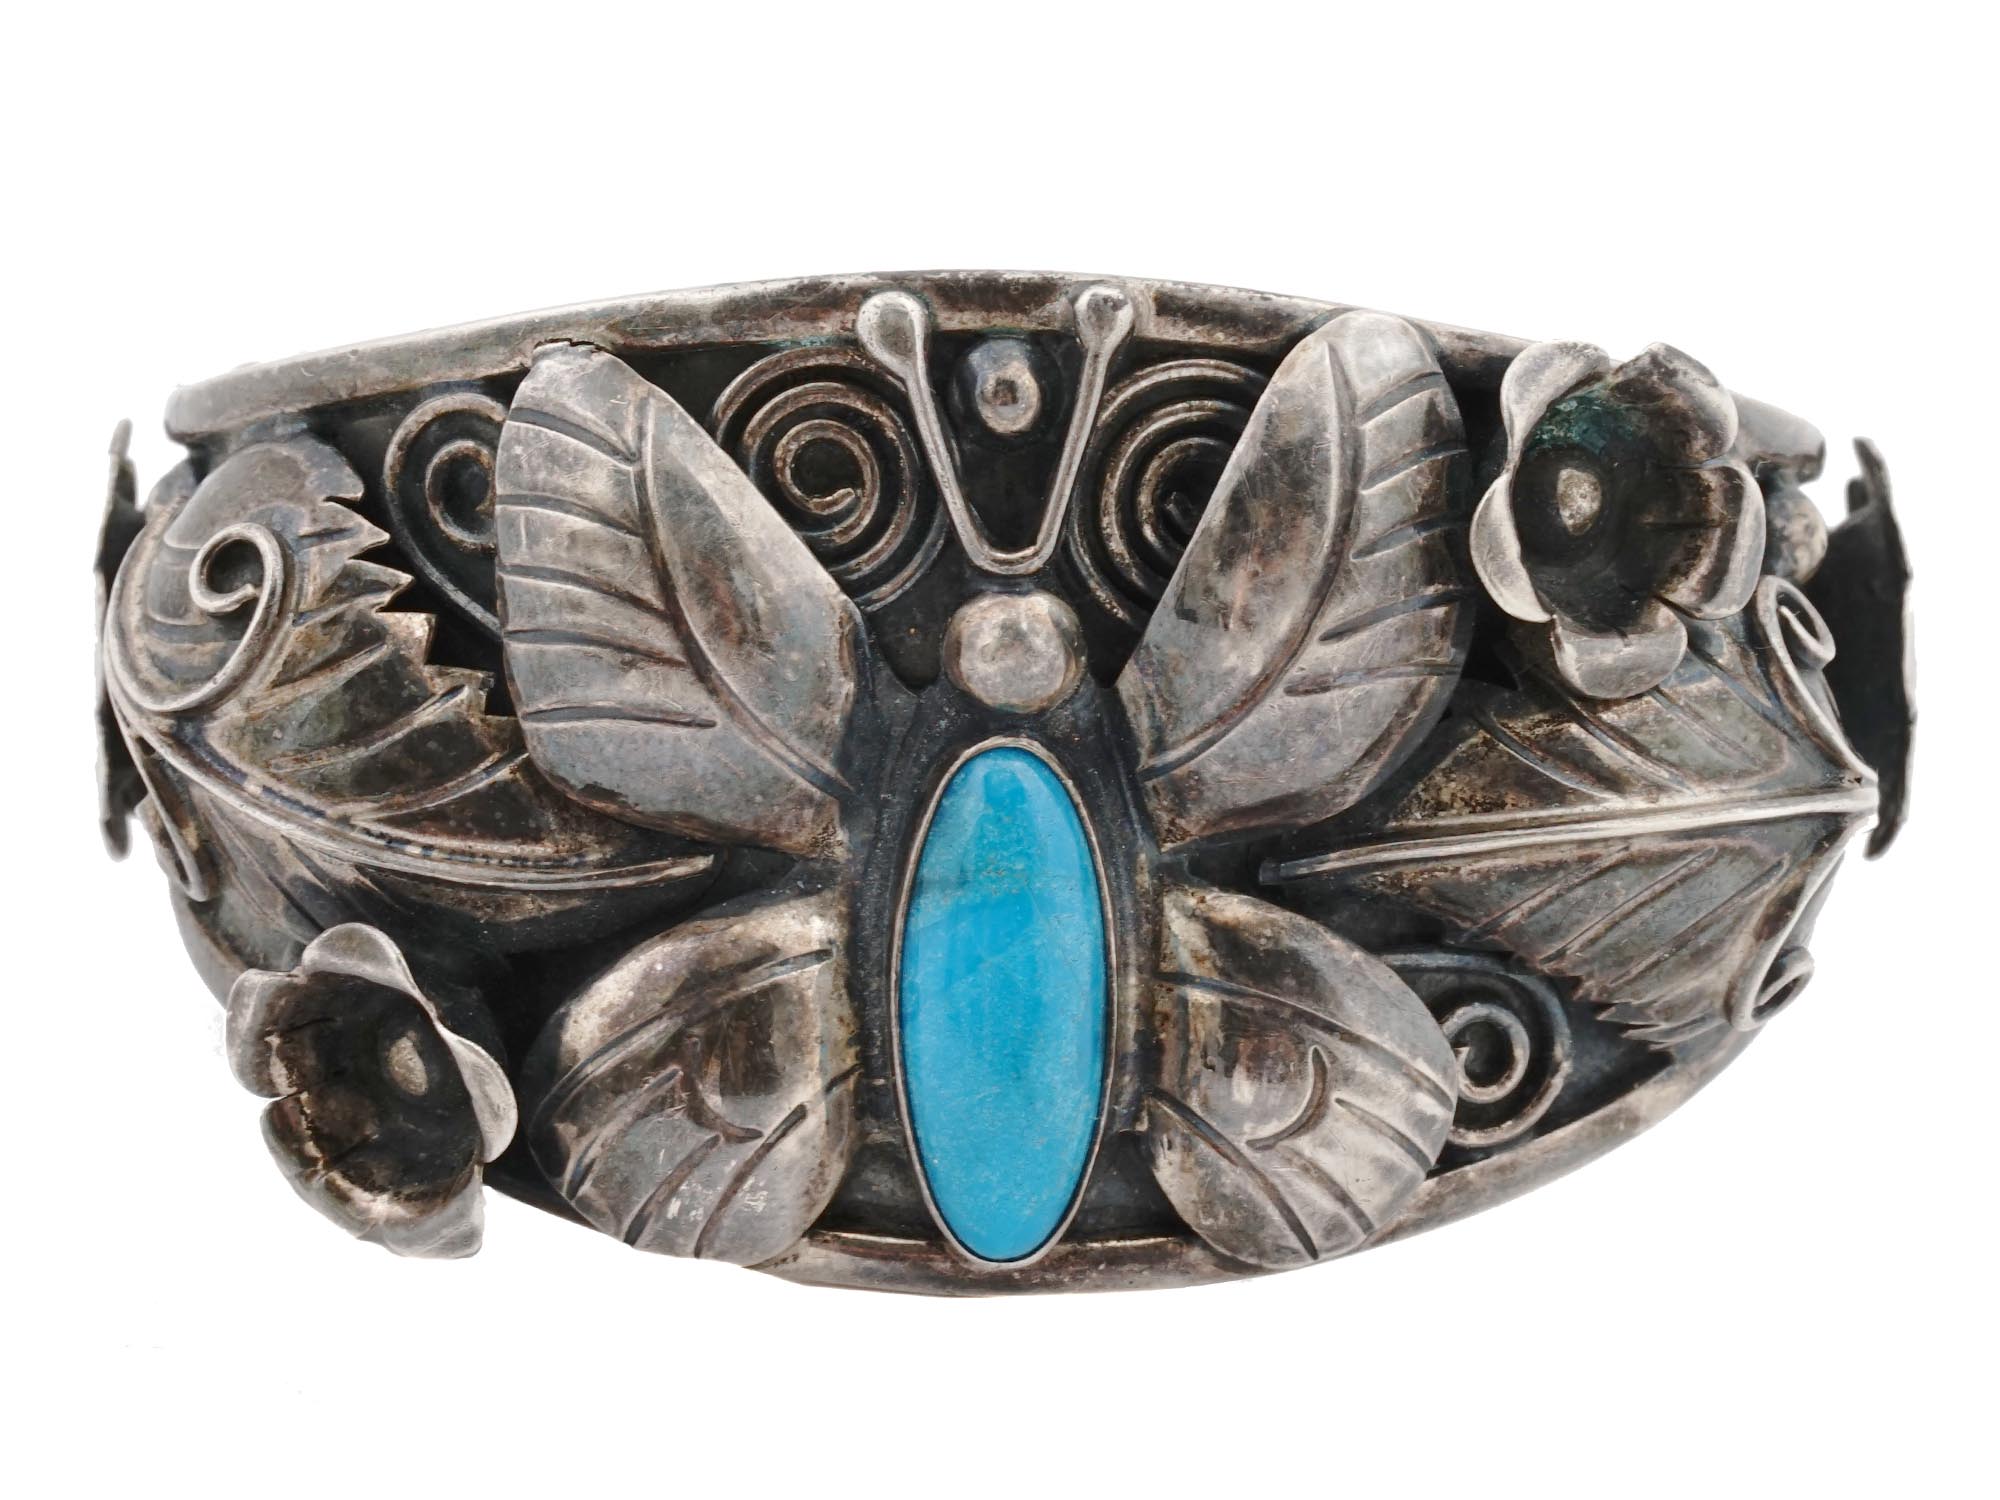 VTG AMERICAN NAVAJO STYLE SILVER TURQUOISE CUFF BANGLE PIC-3